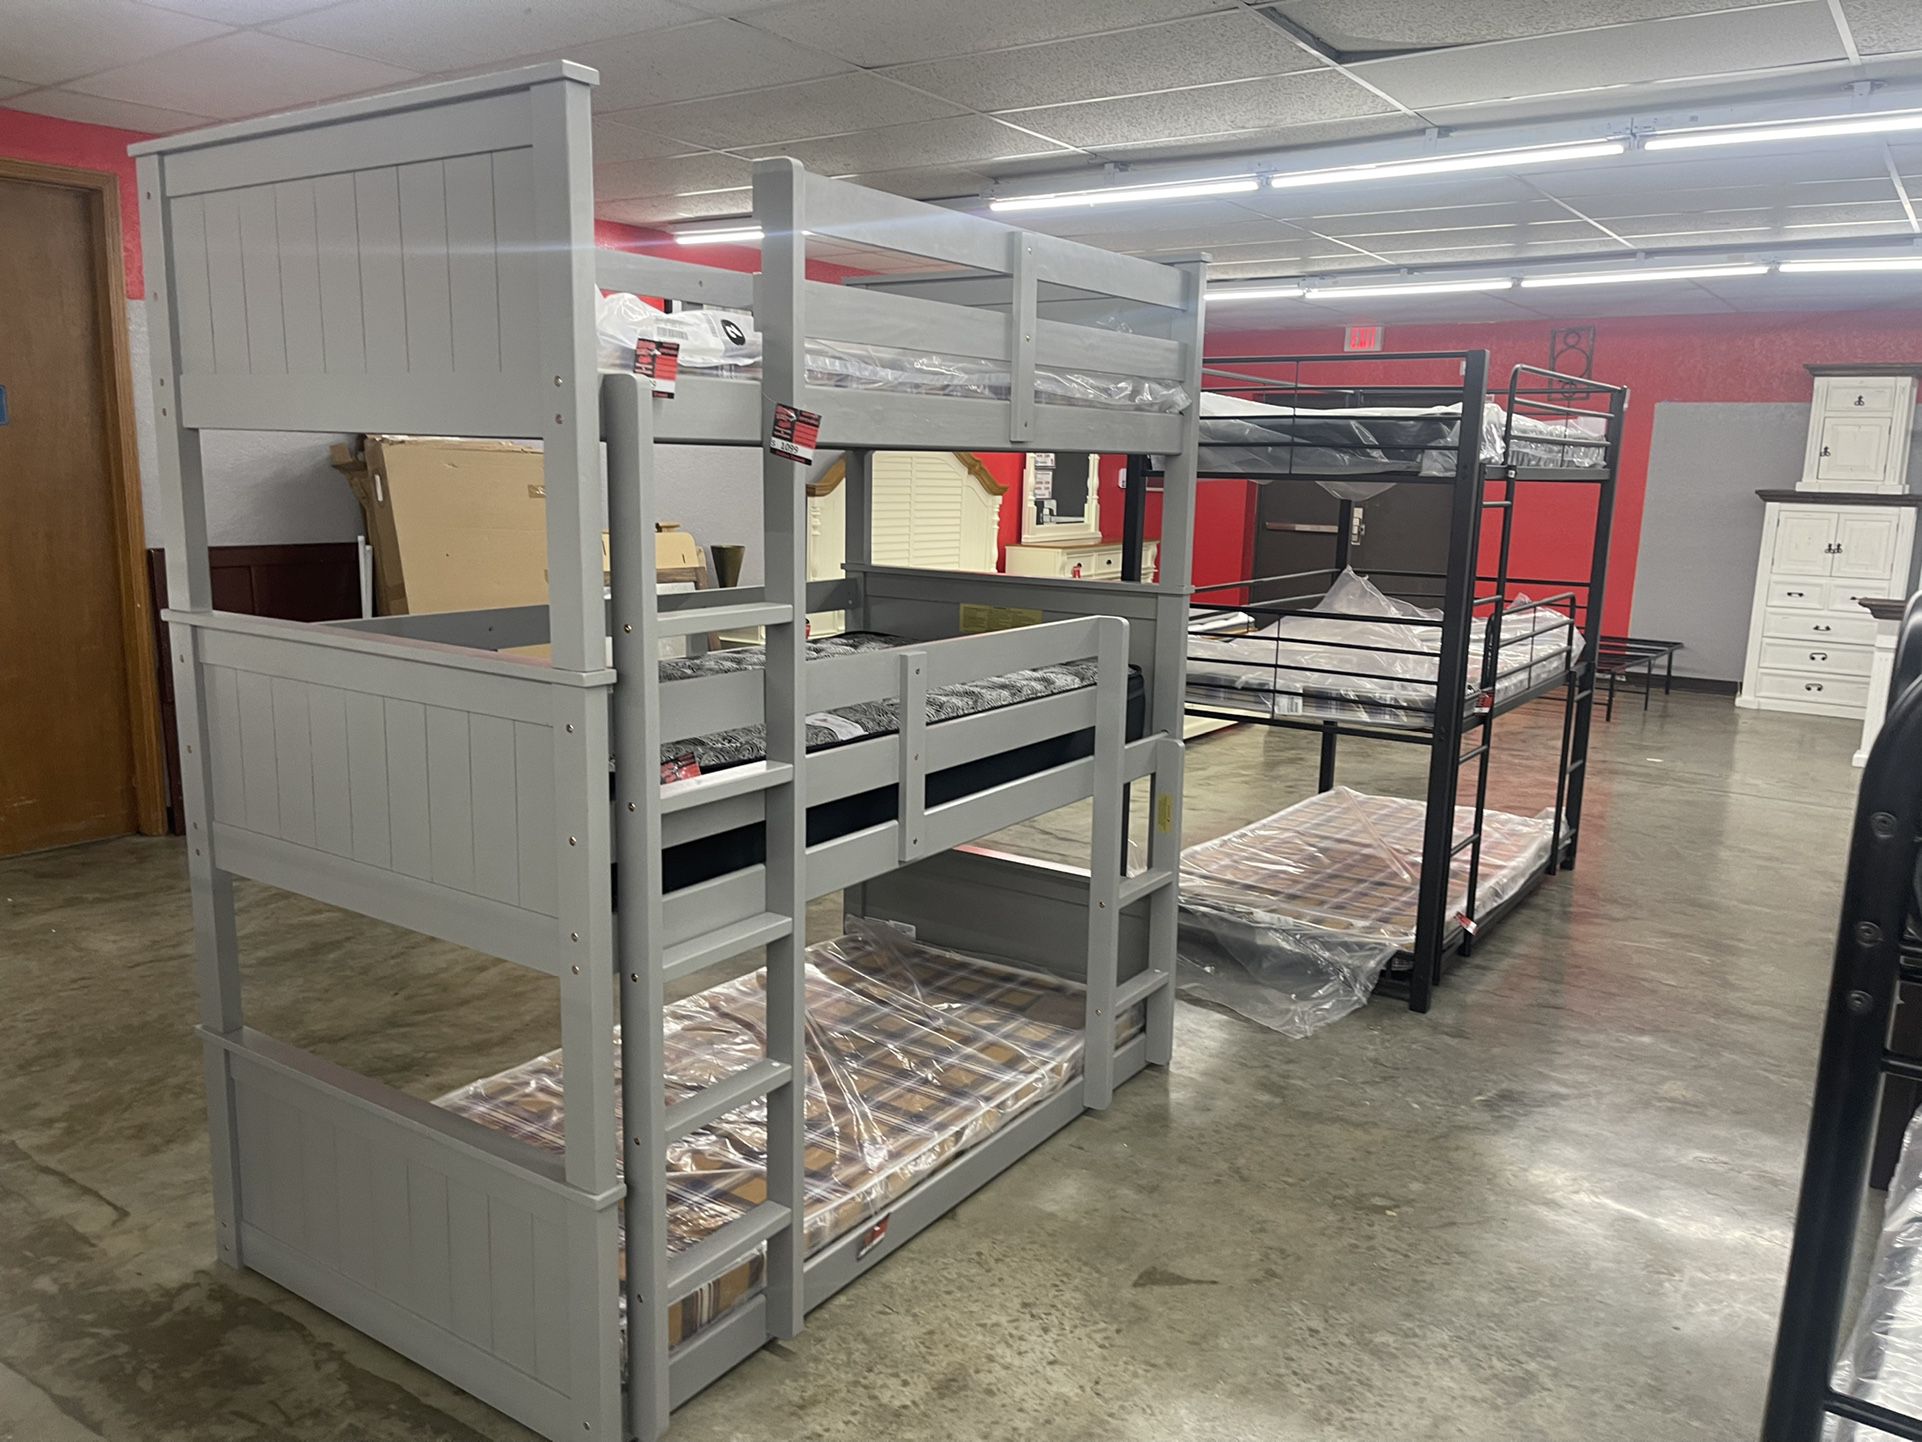 Triple Decker Bunk Bed On Sale Now!!! $1 Down Everyone Is Approved ✅